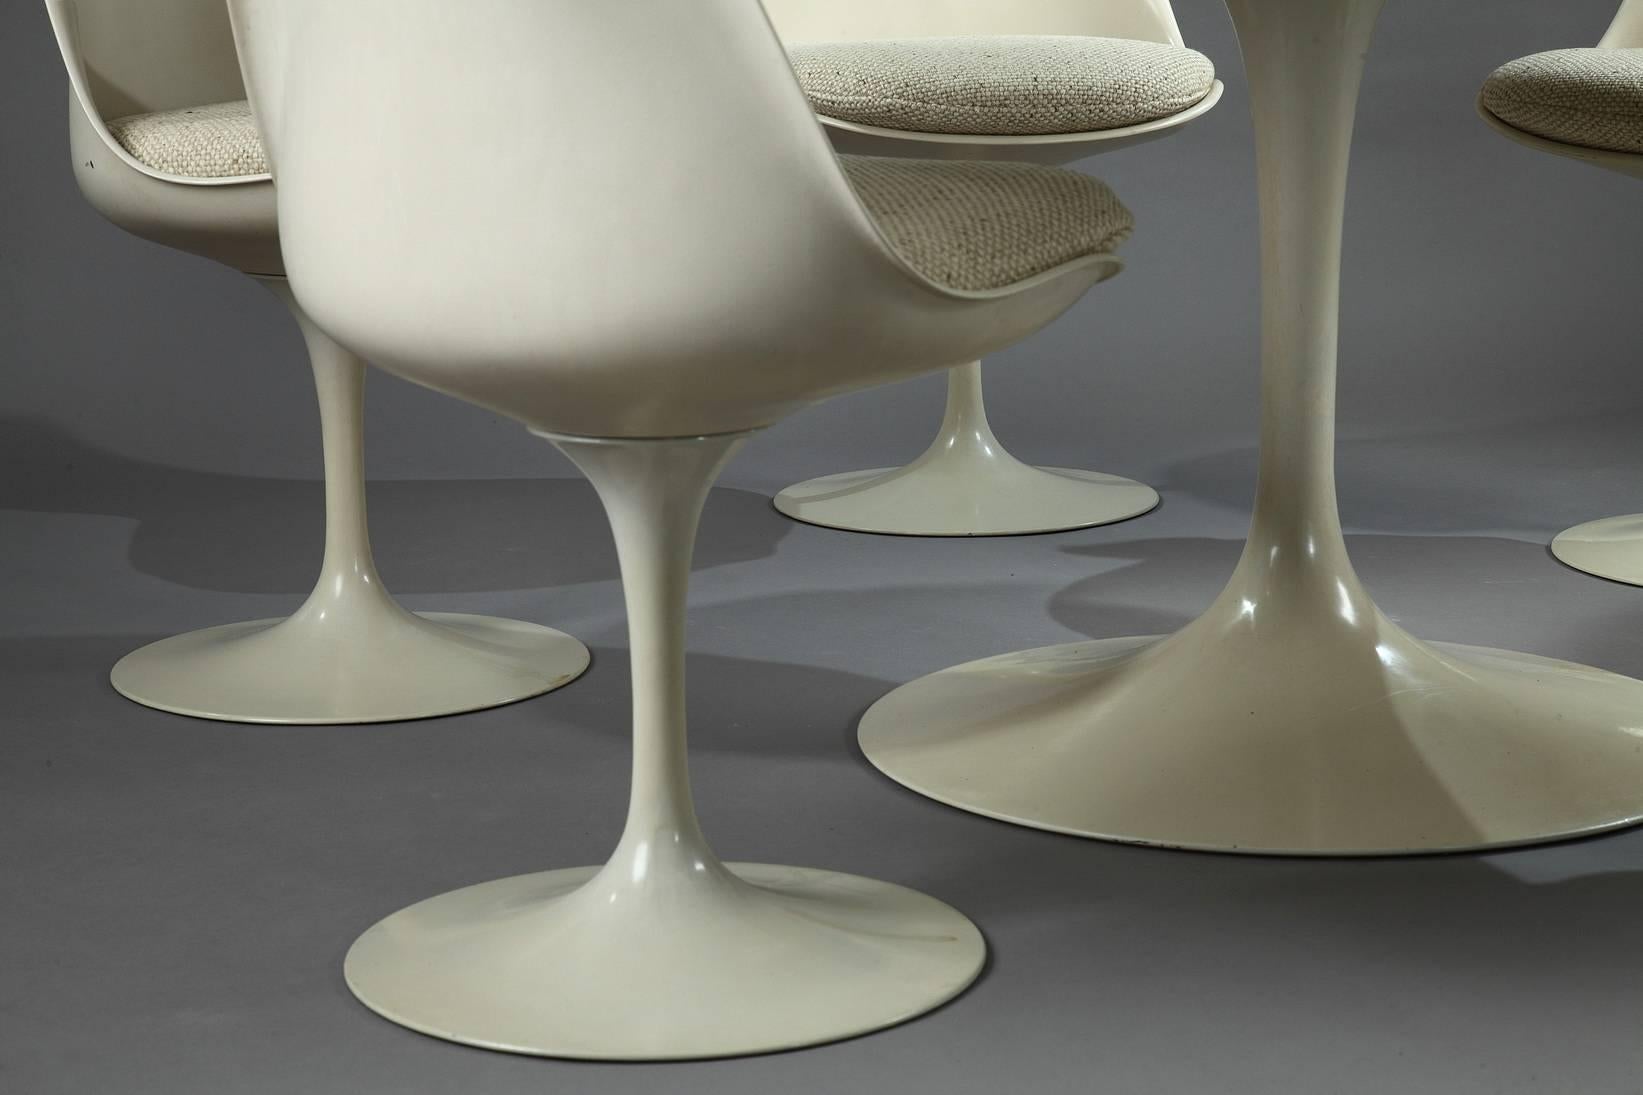 Tulip Dining Table and Set of Five Tulip Seats by Eero Saarinen for Knoll 1